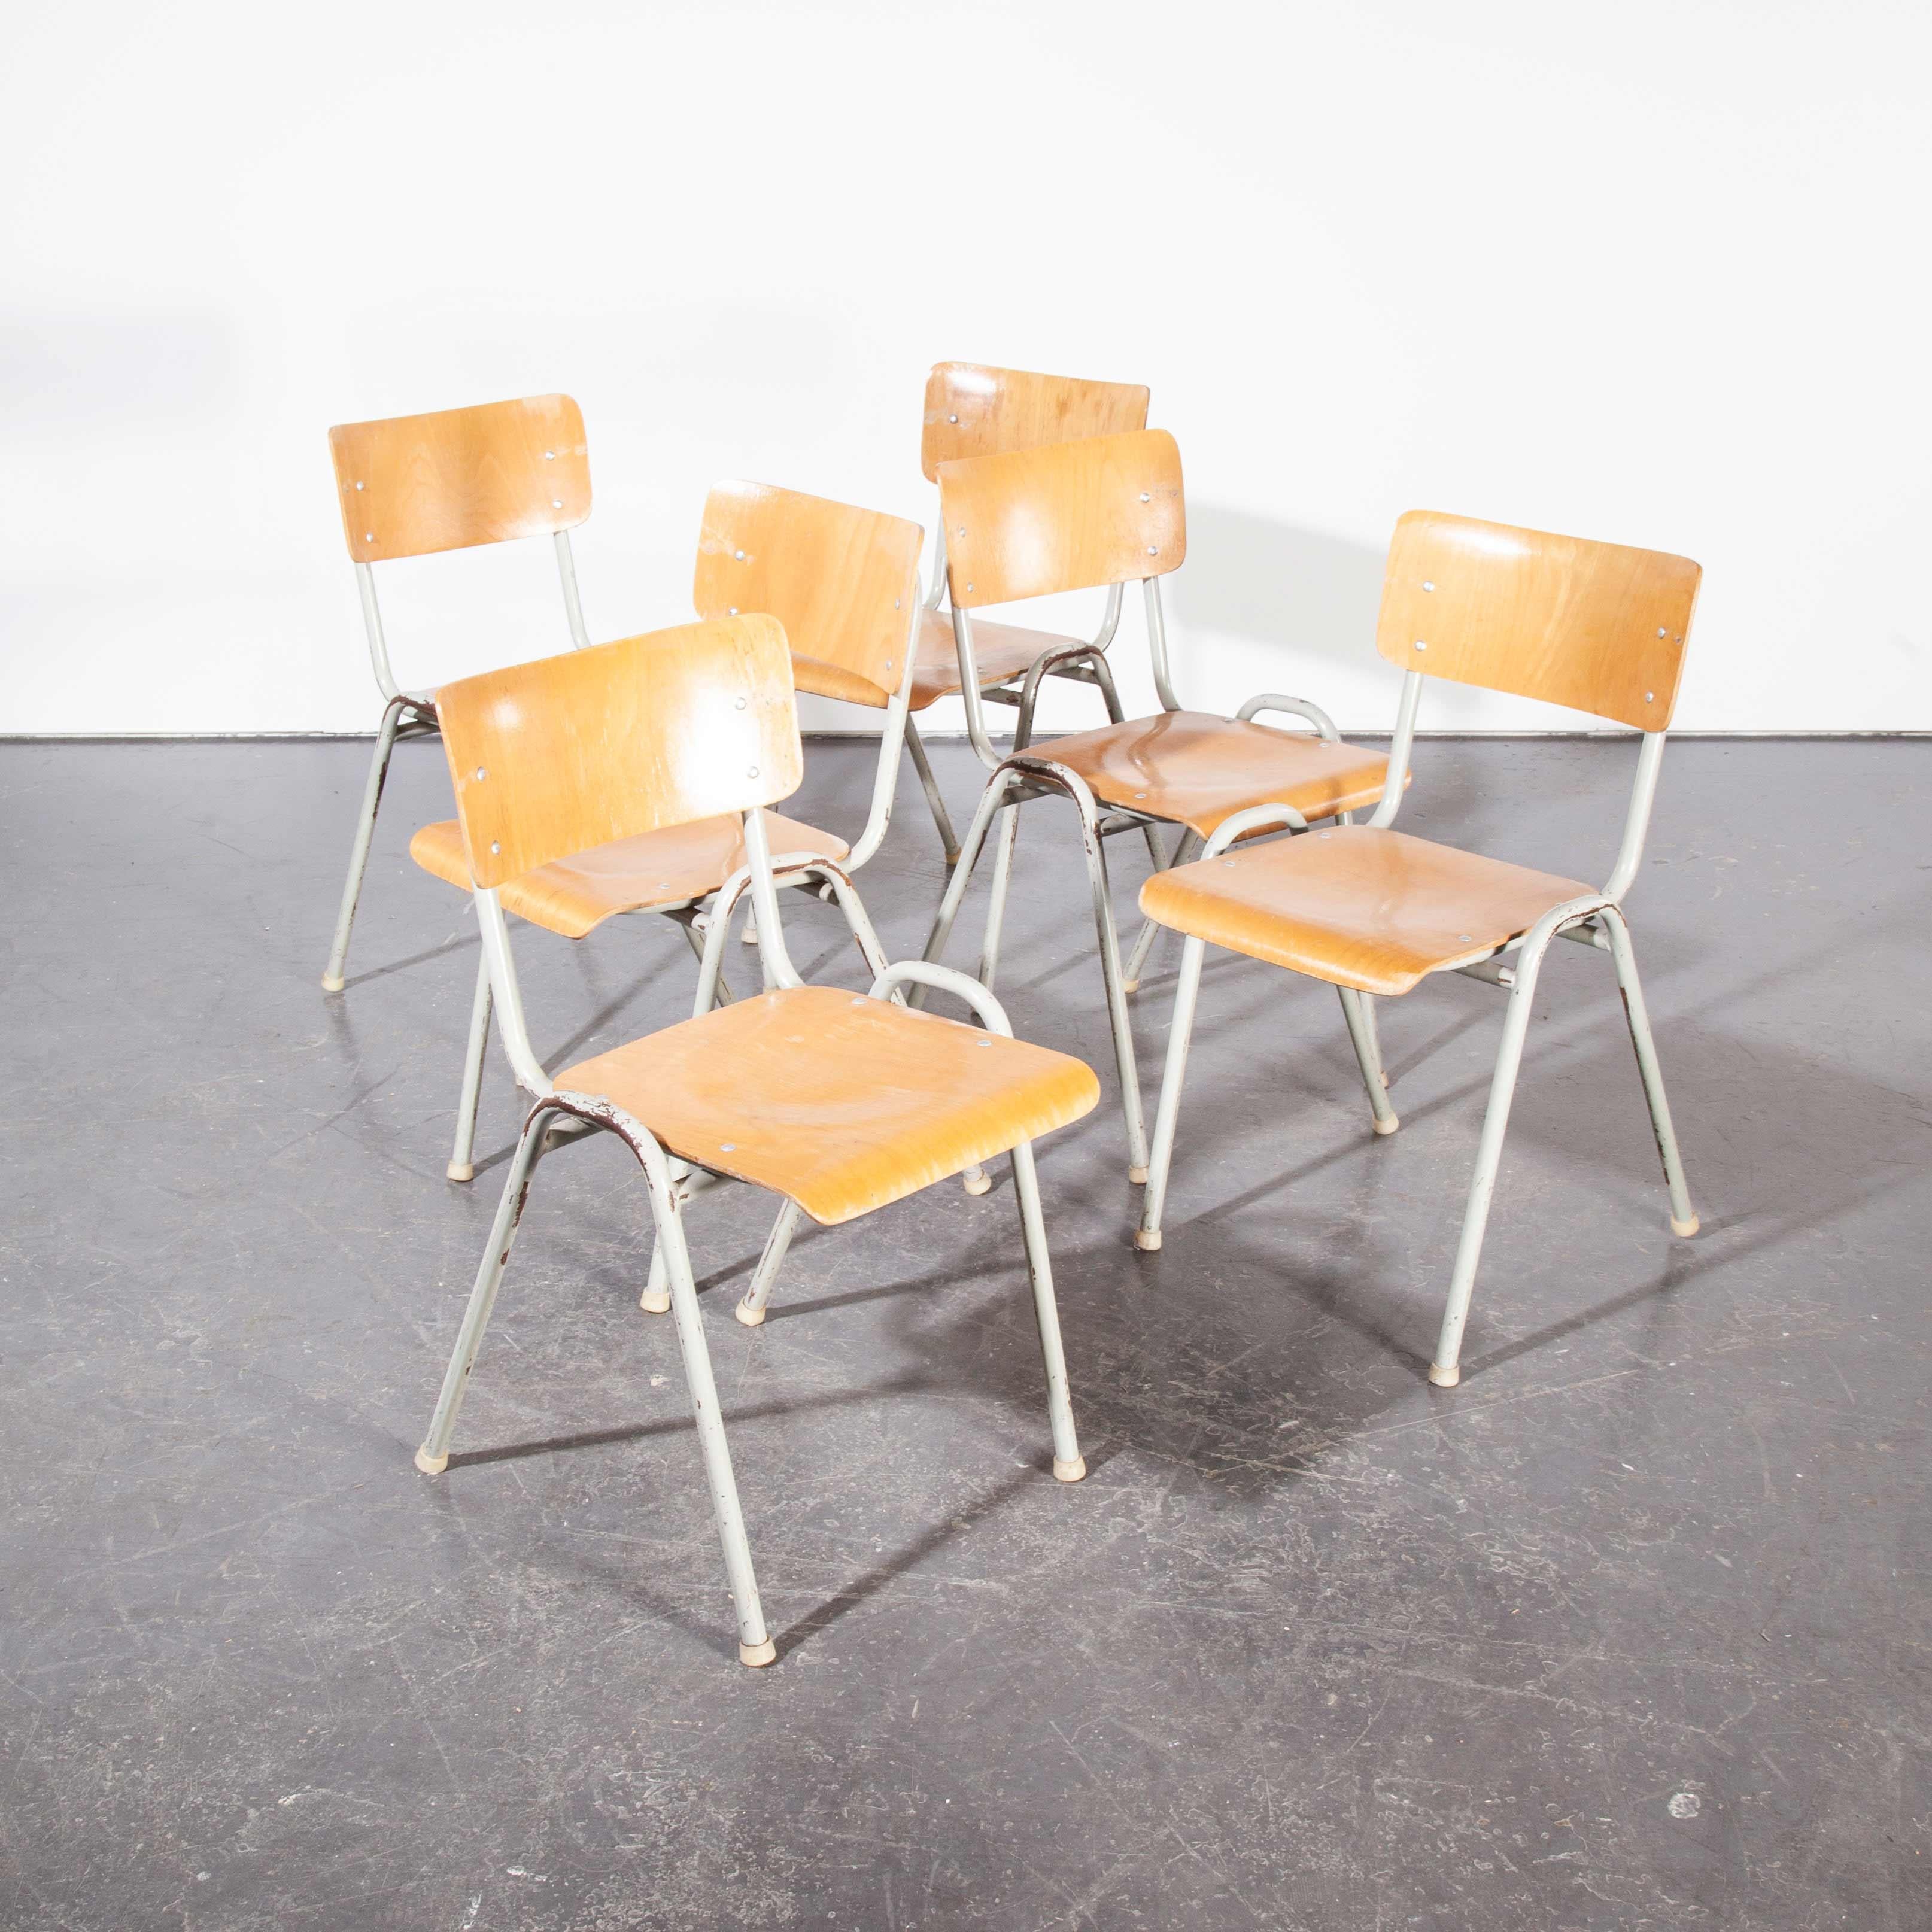 1960s French metal framed stacking university, dining chairs, set of six

1960s French metal framed stacking university, dining chairs, set of six. We sourced these great chairs from a campus in Southern France. Great robust stacking chairs with a